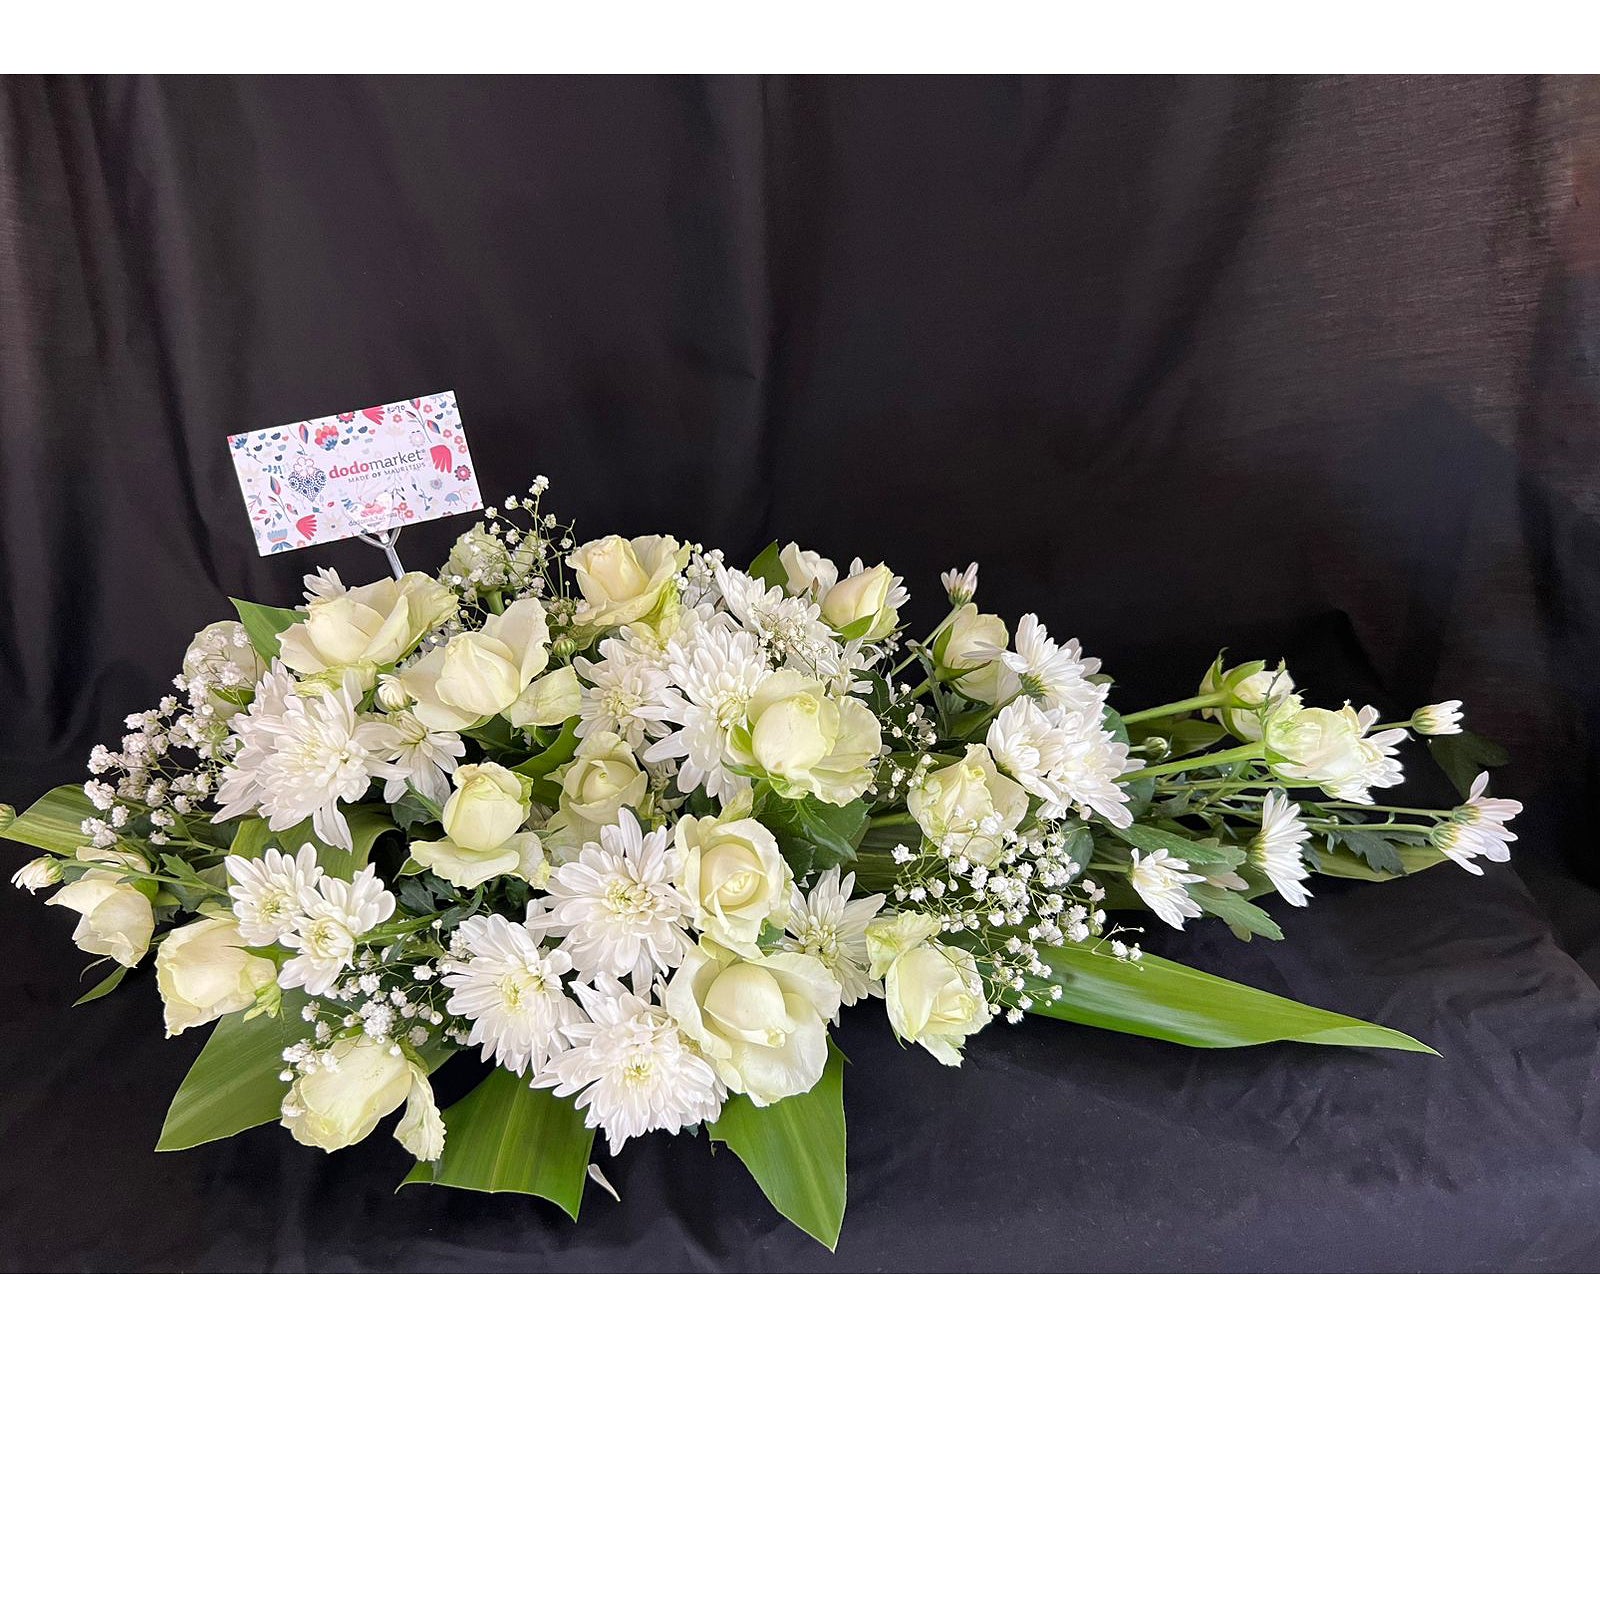 Sympathy-Funeral-White-Flower-composition-Purity-DodoMarket-delivery-Mauritius